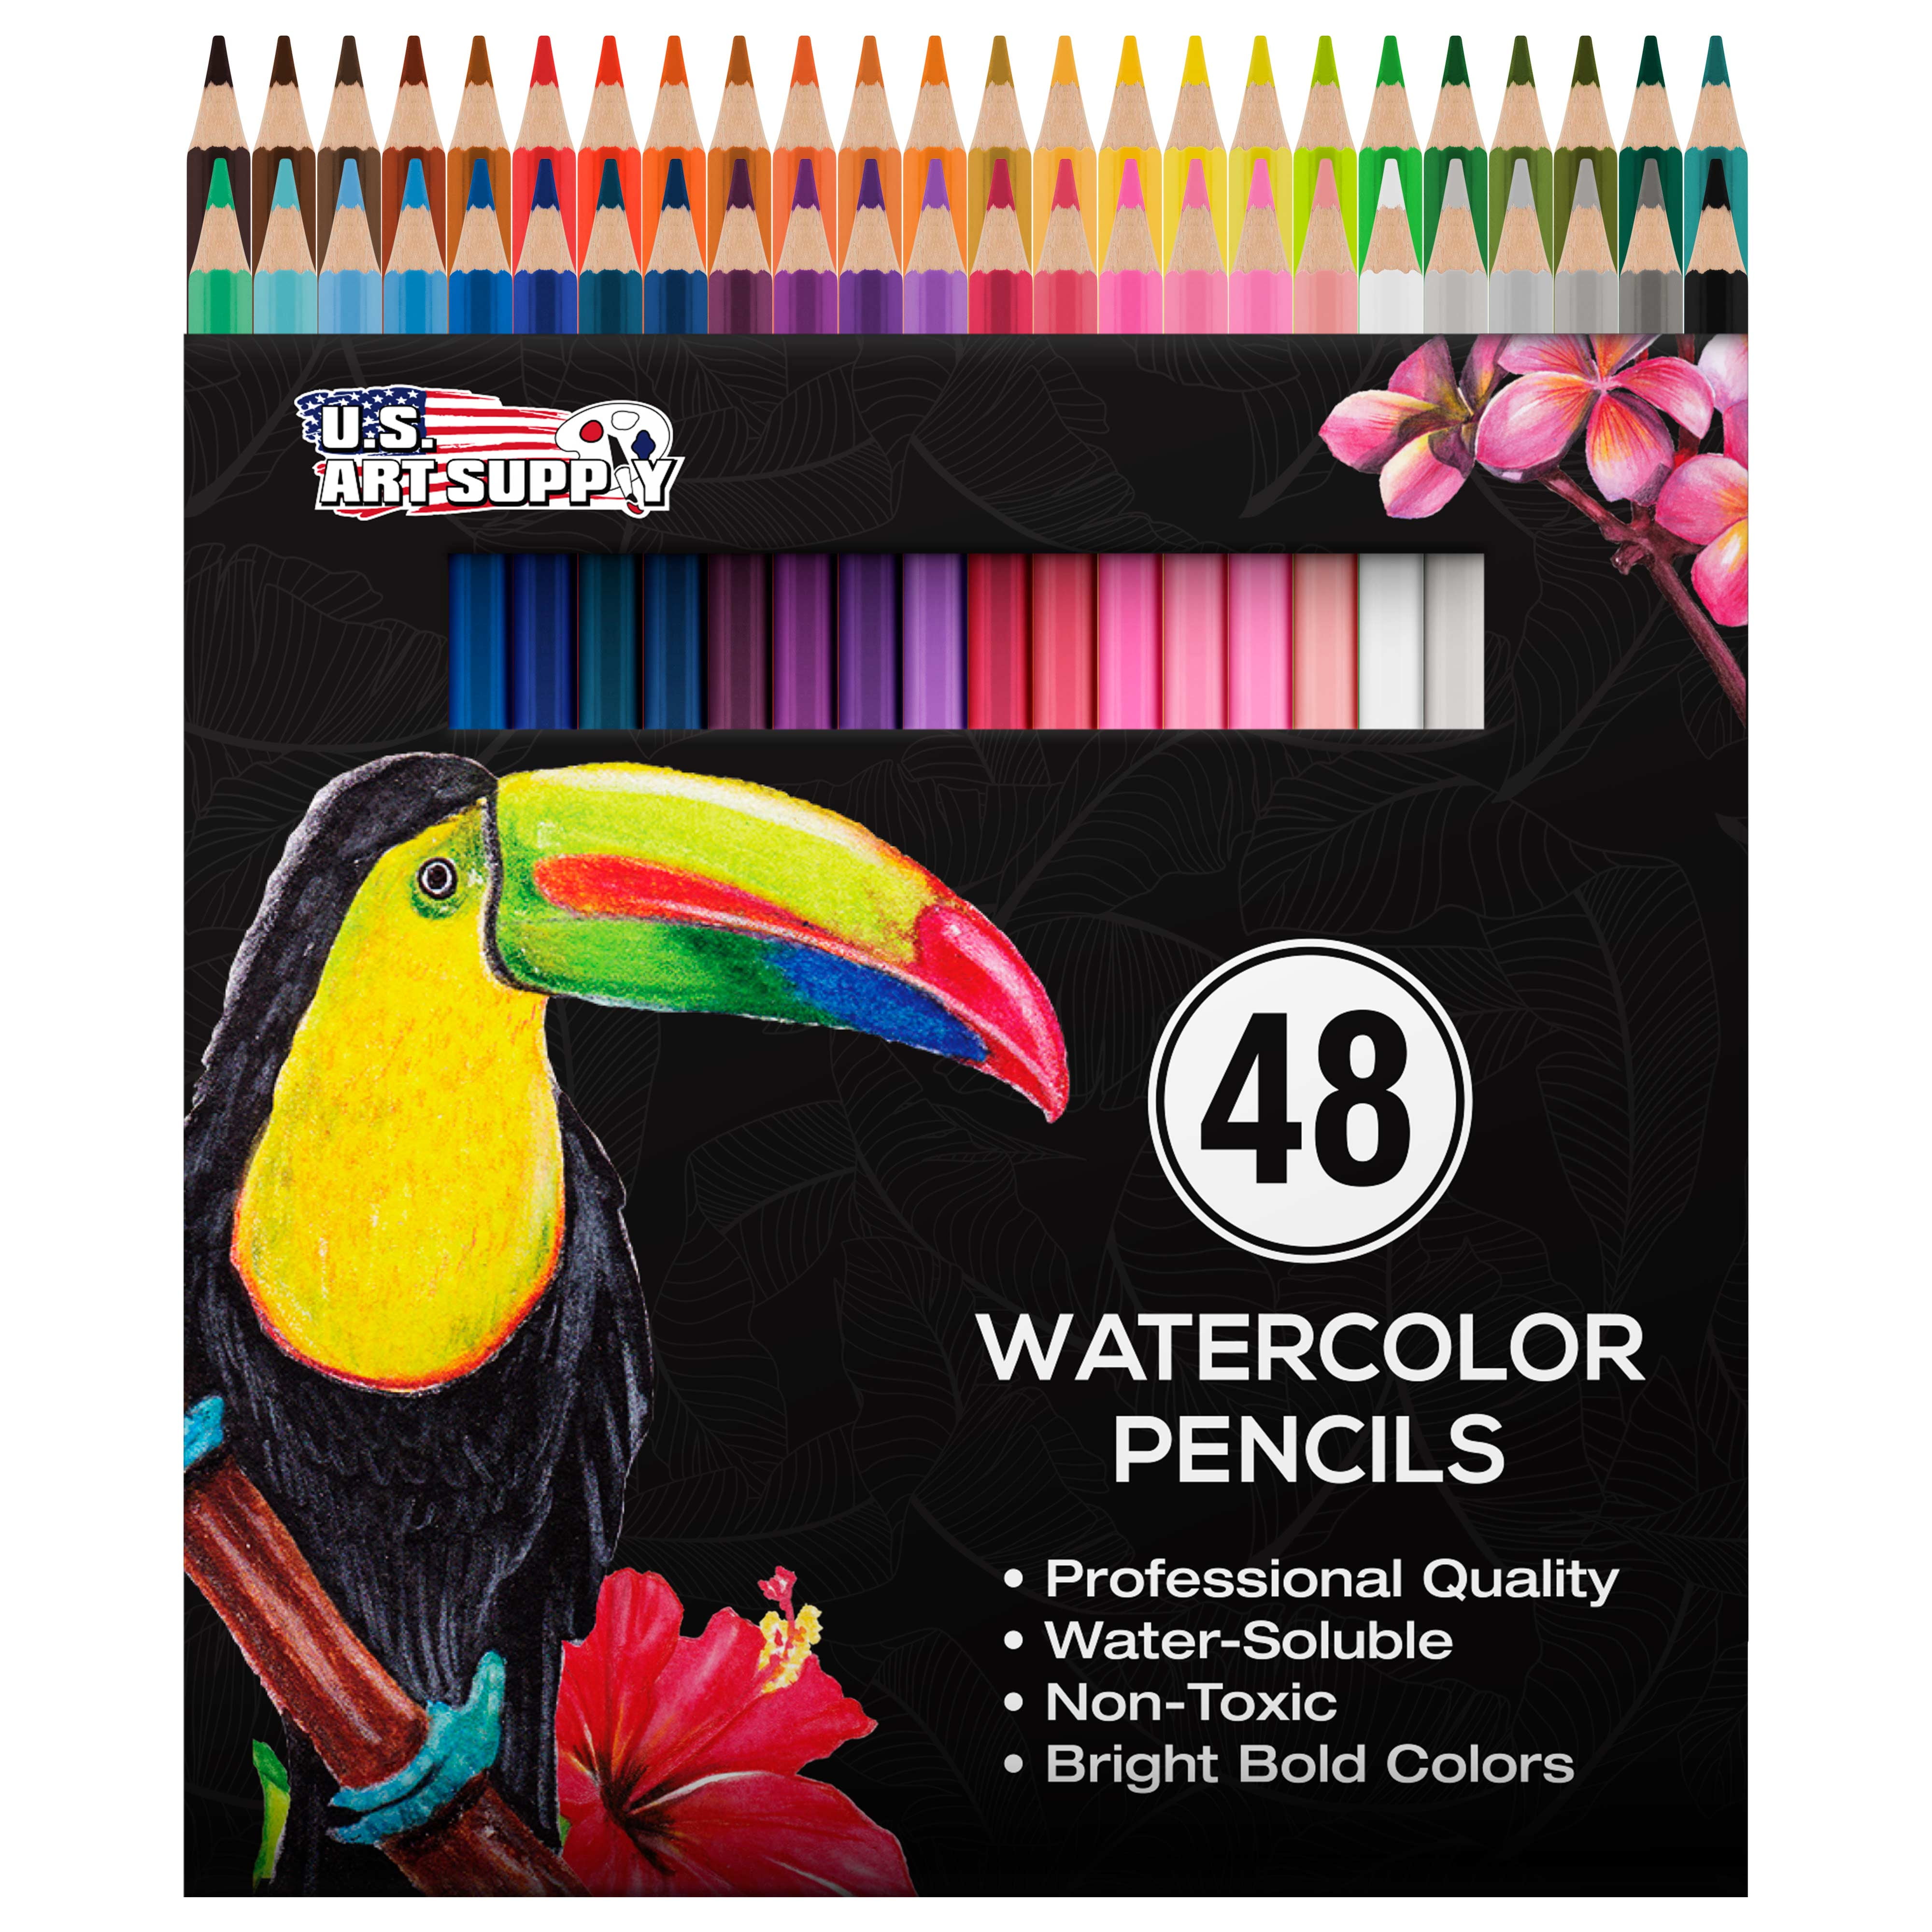 Watercolor vs. Water Soluble Colored Pencils (Episode III of The Coloring  Nerd Supplies Guide)